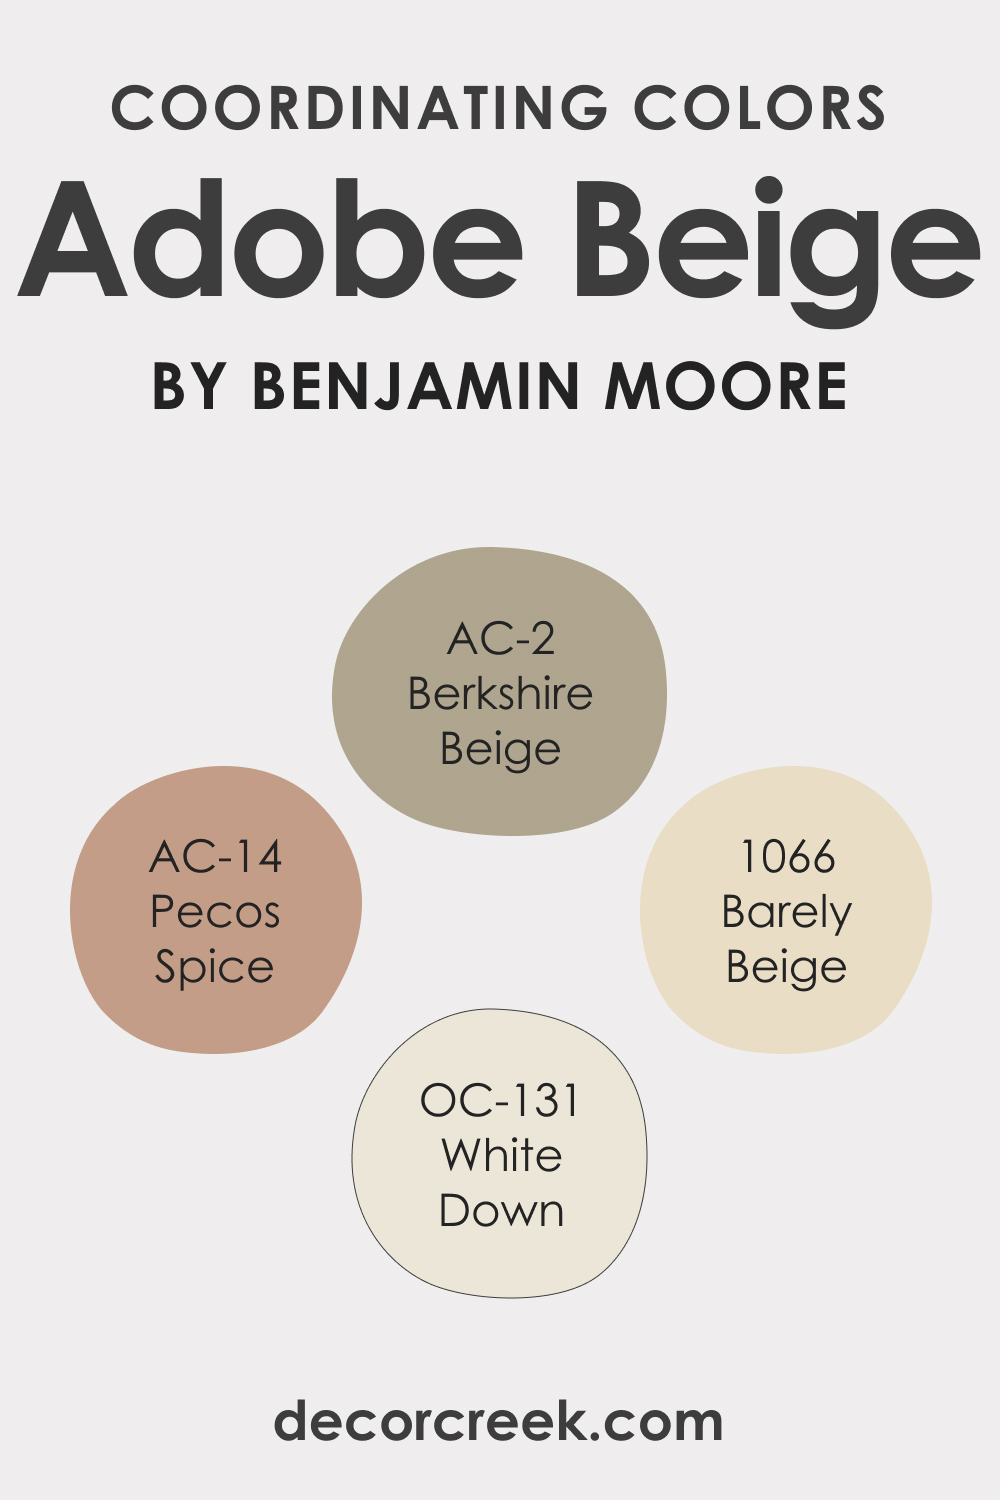 Coordinating Colors of Adobe Beige AC-7